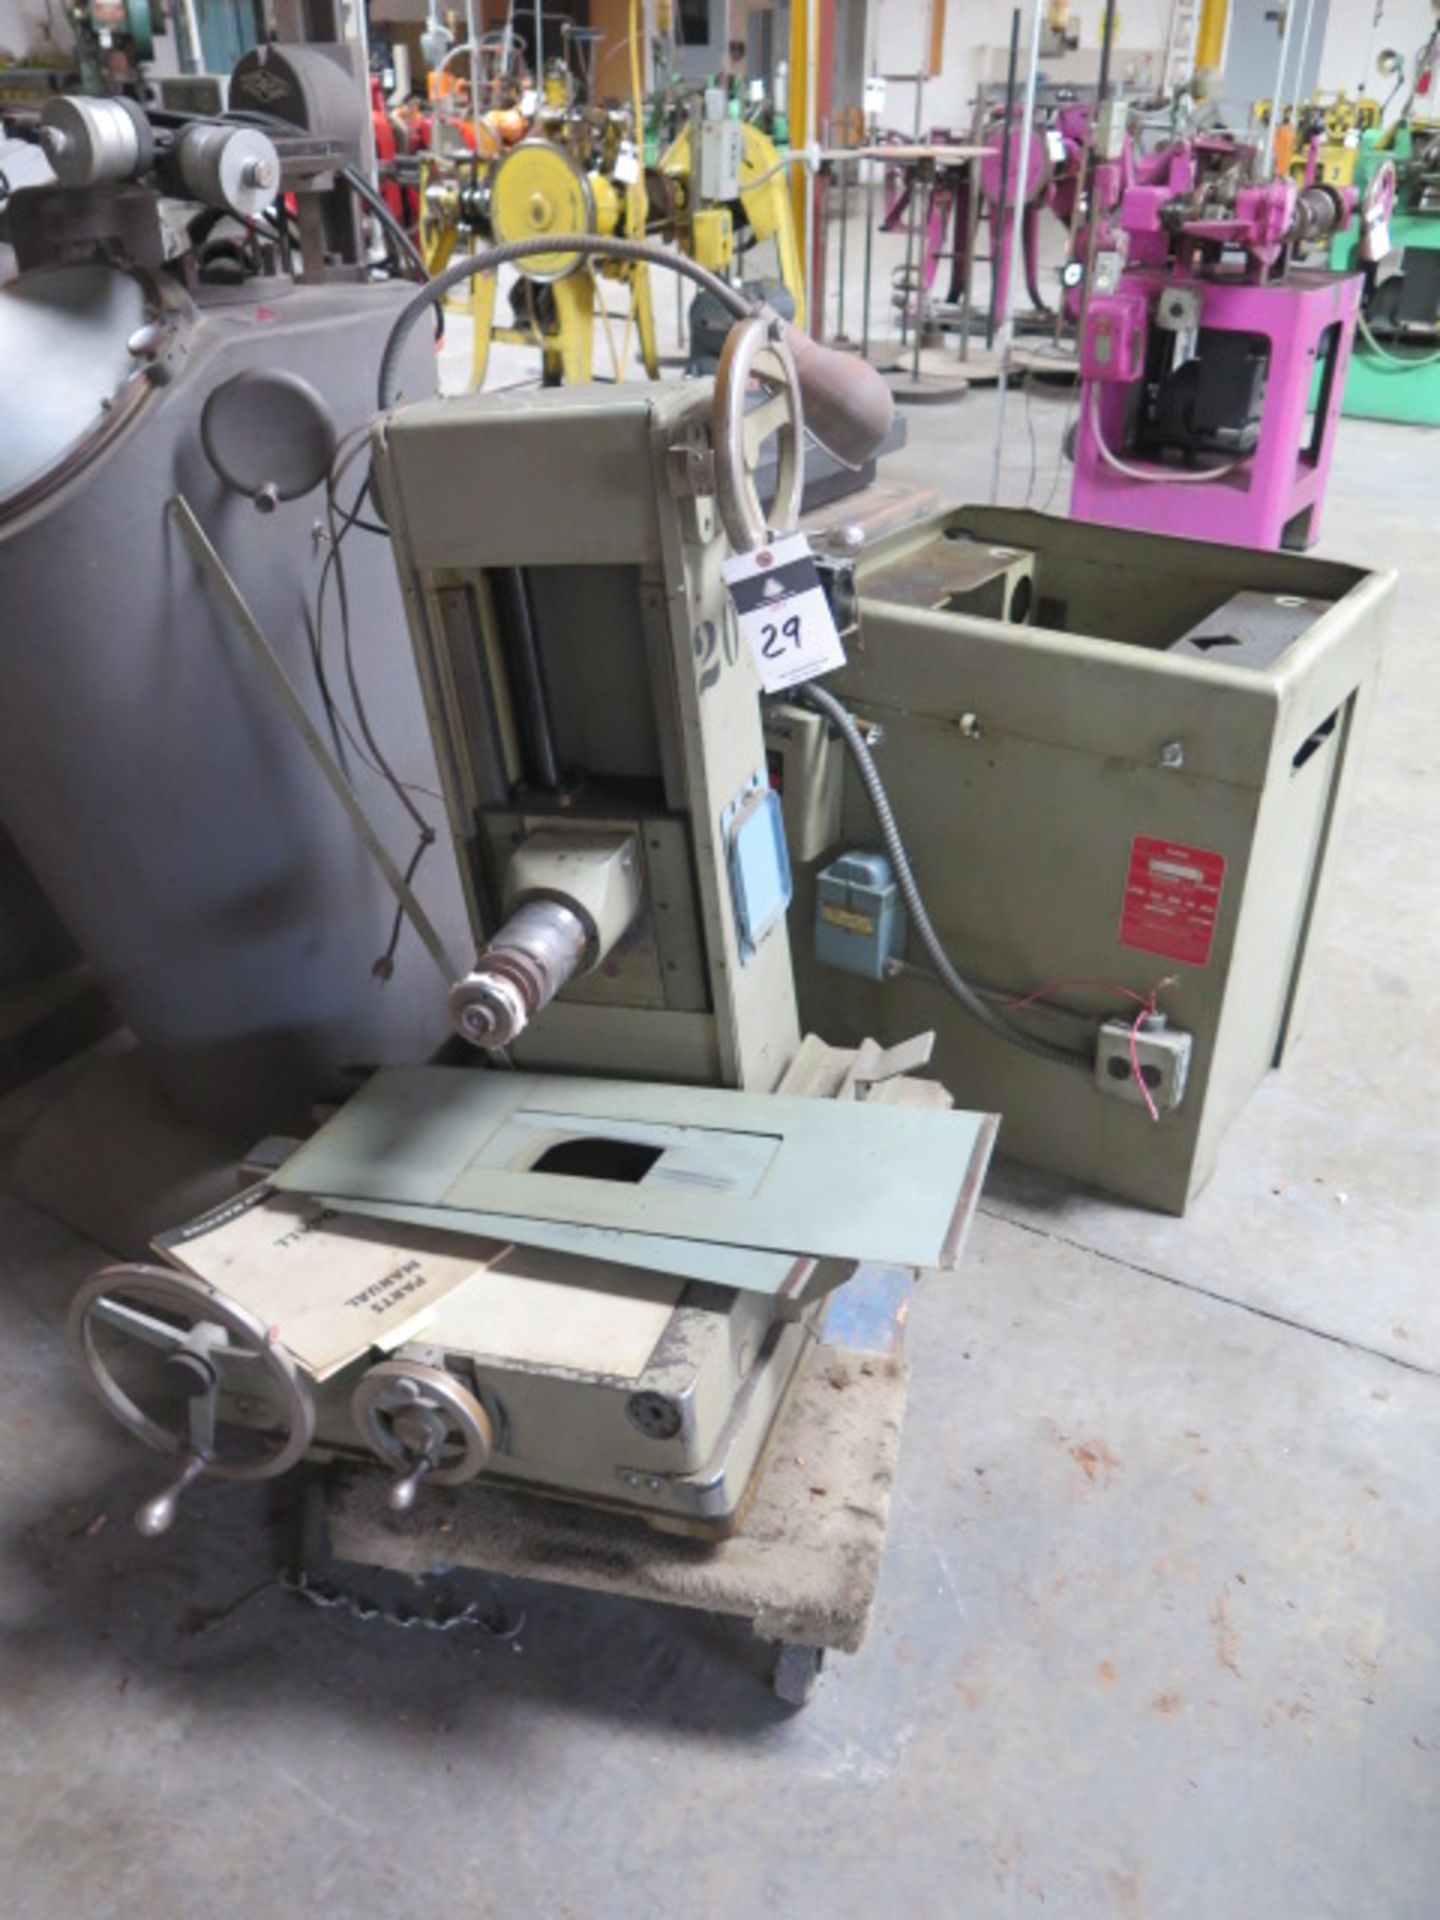 DoAll DH-612 6” x 12” Surface Grinder s/n 138-682780 (FOR PARTS)